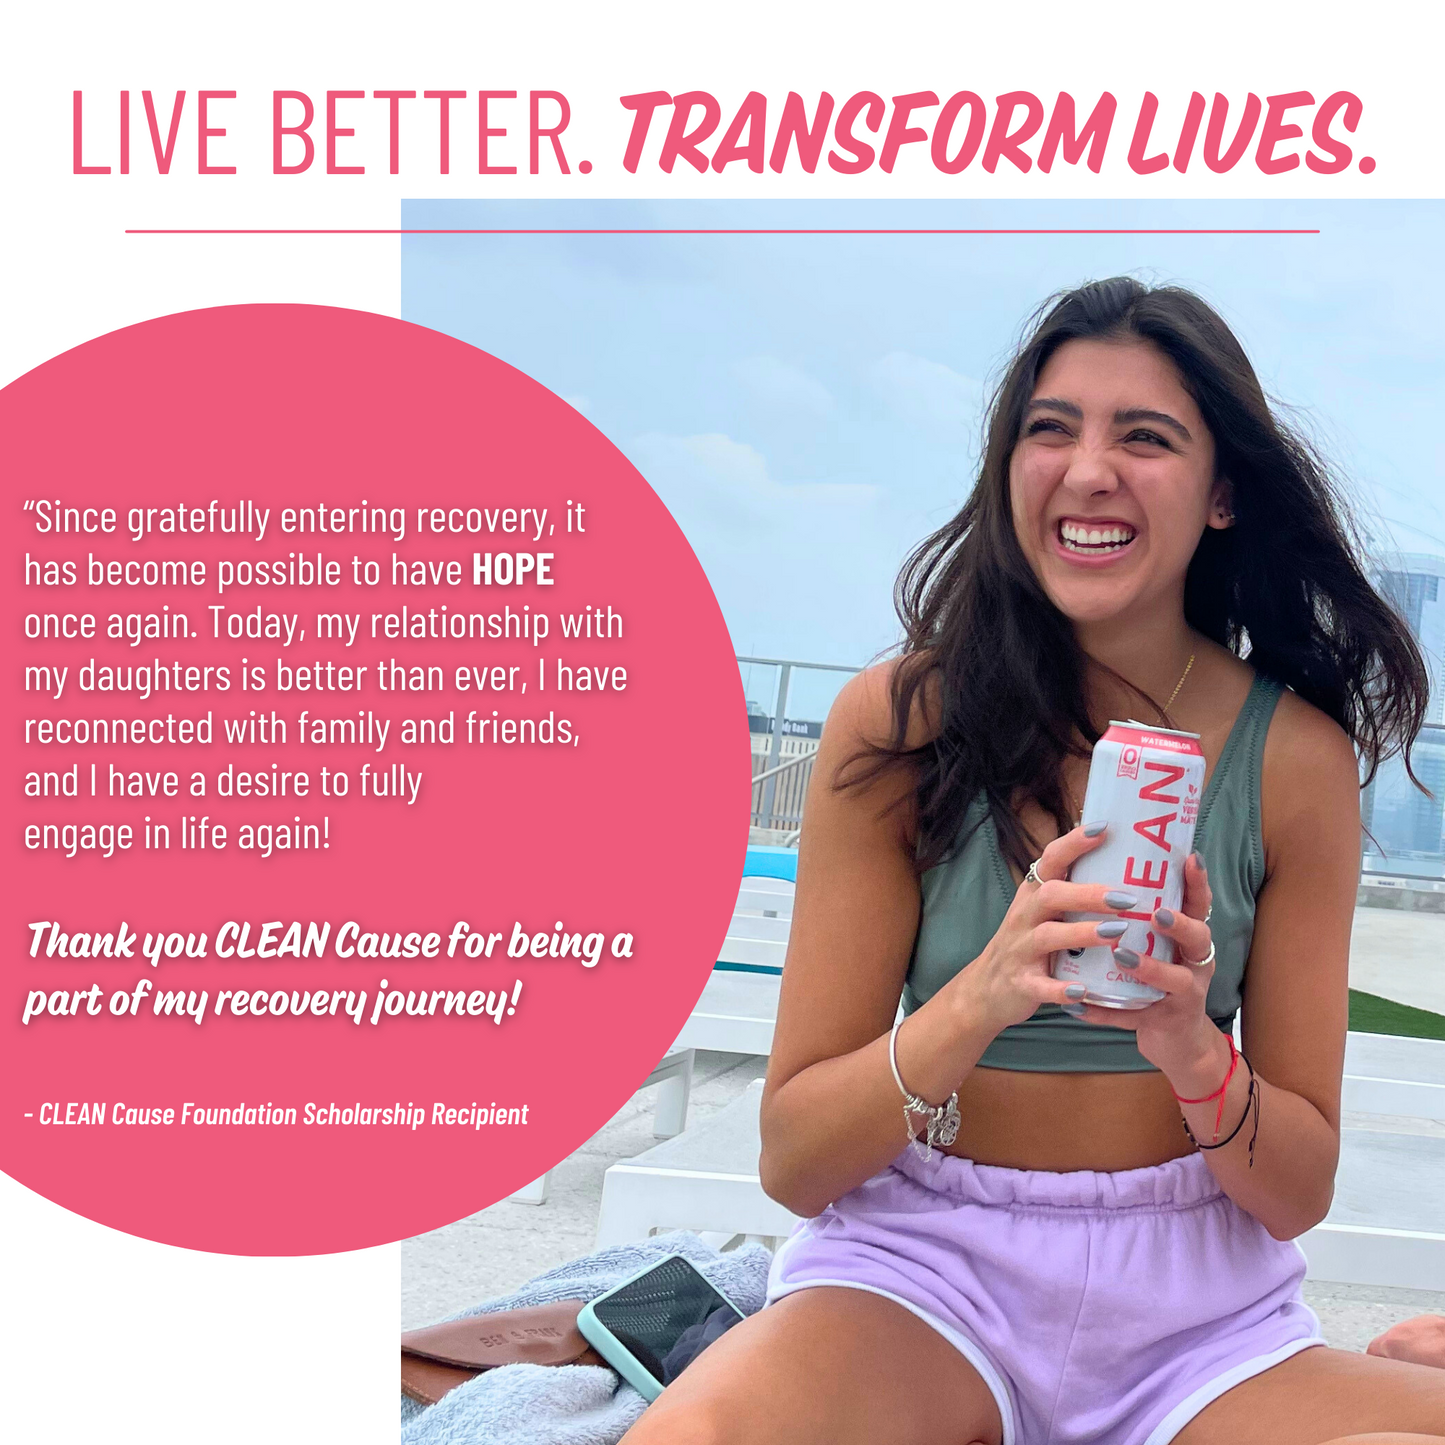 A picture of a girl smiling holding a can of CLEAN Cause with the slogan Live Better. Transform Lives. above it and a scholarship recipient story to the left